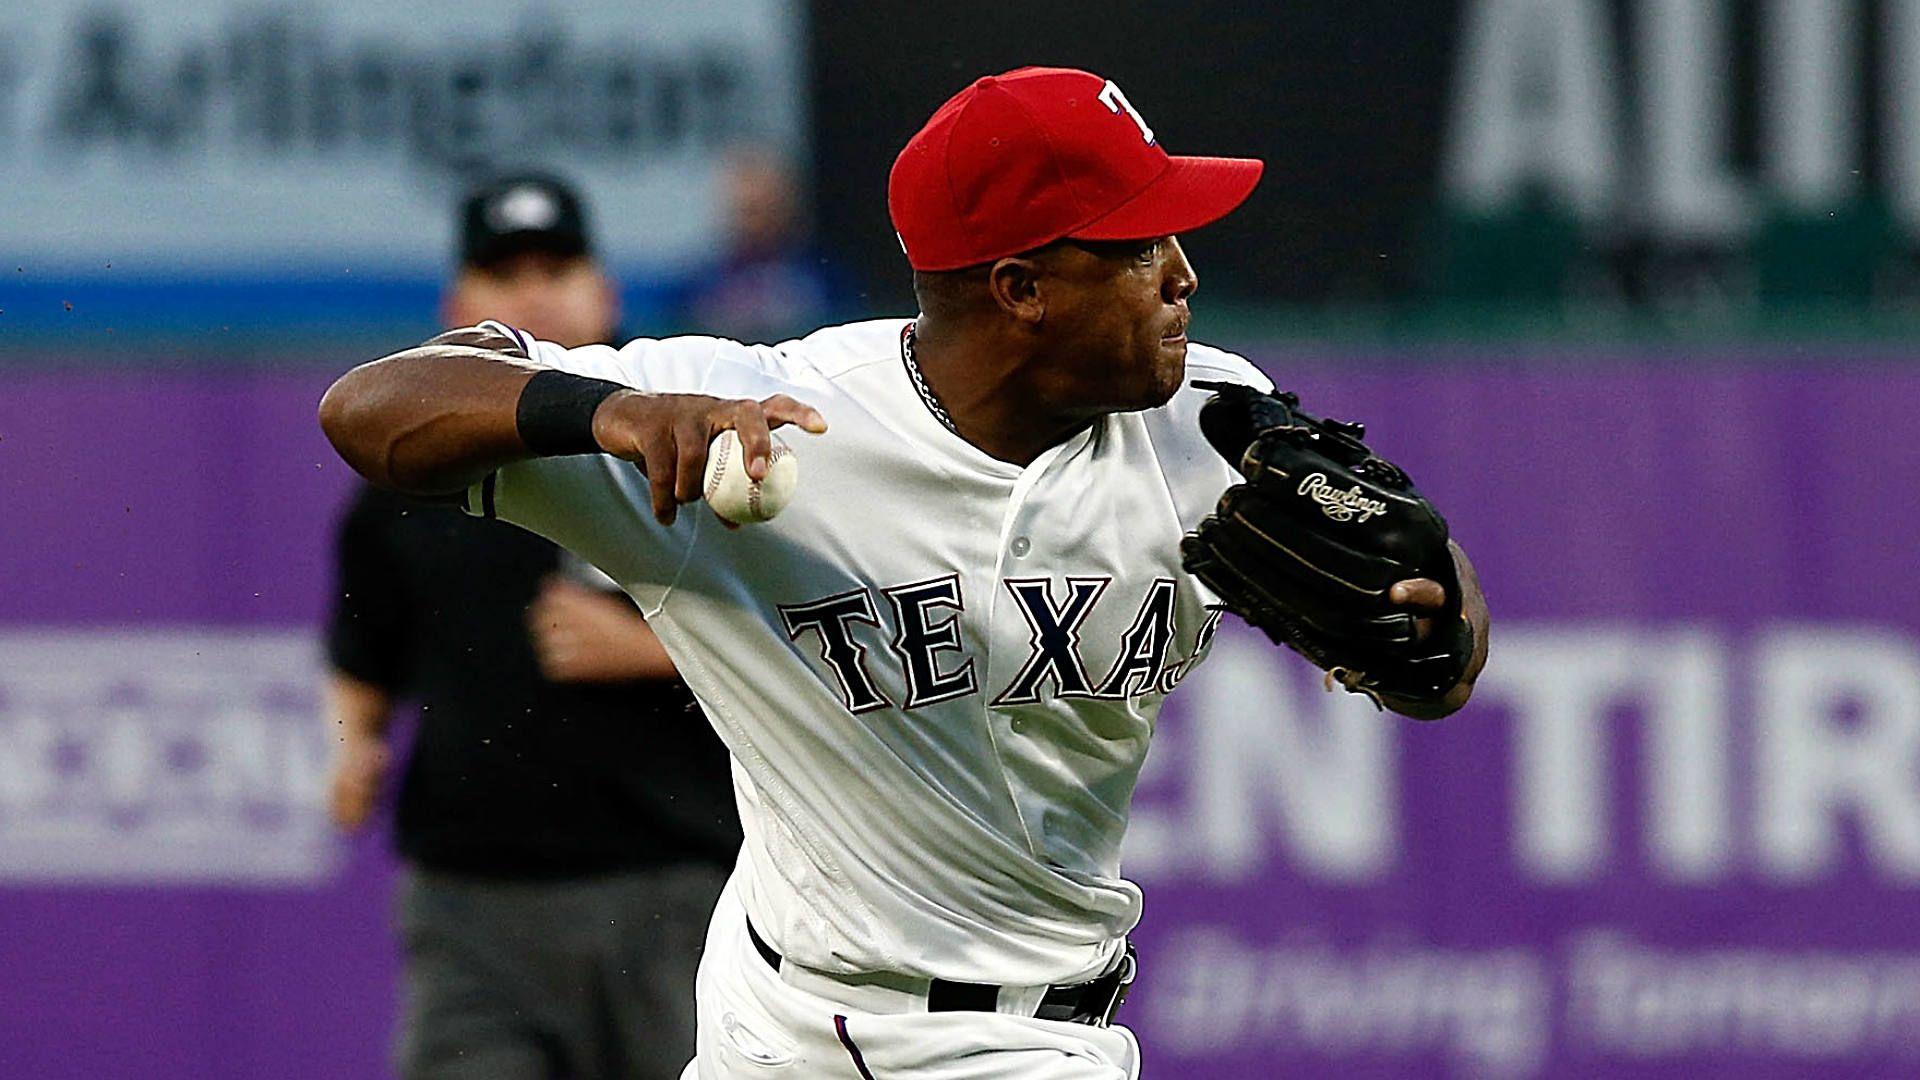 Here's why Adrian Beltre will be an easy Baseball Hall of Fame